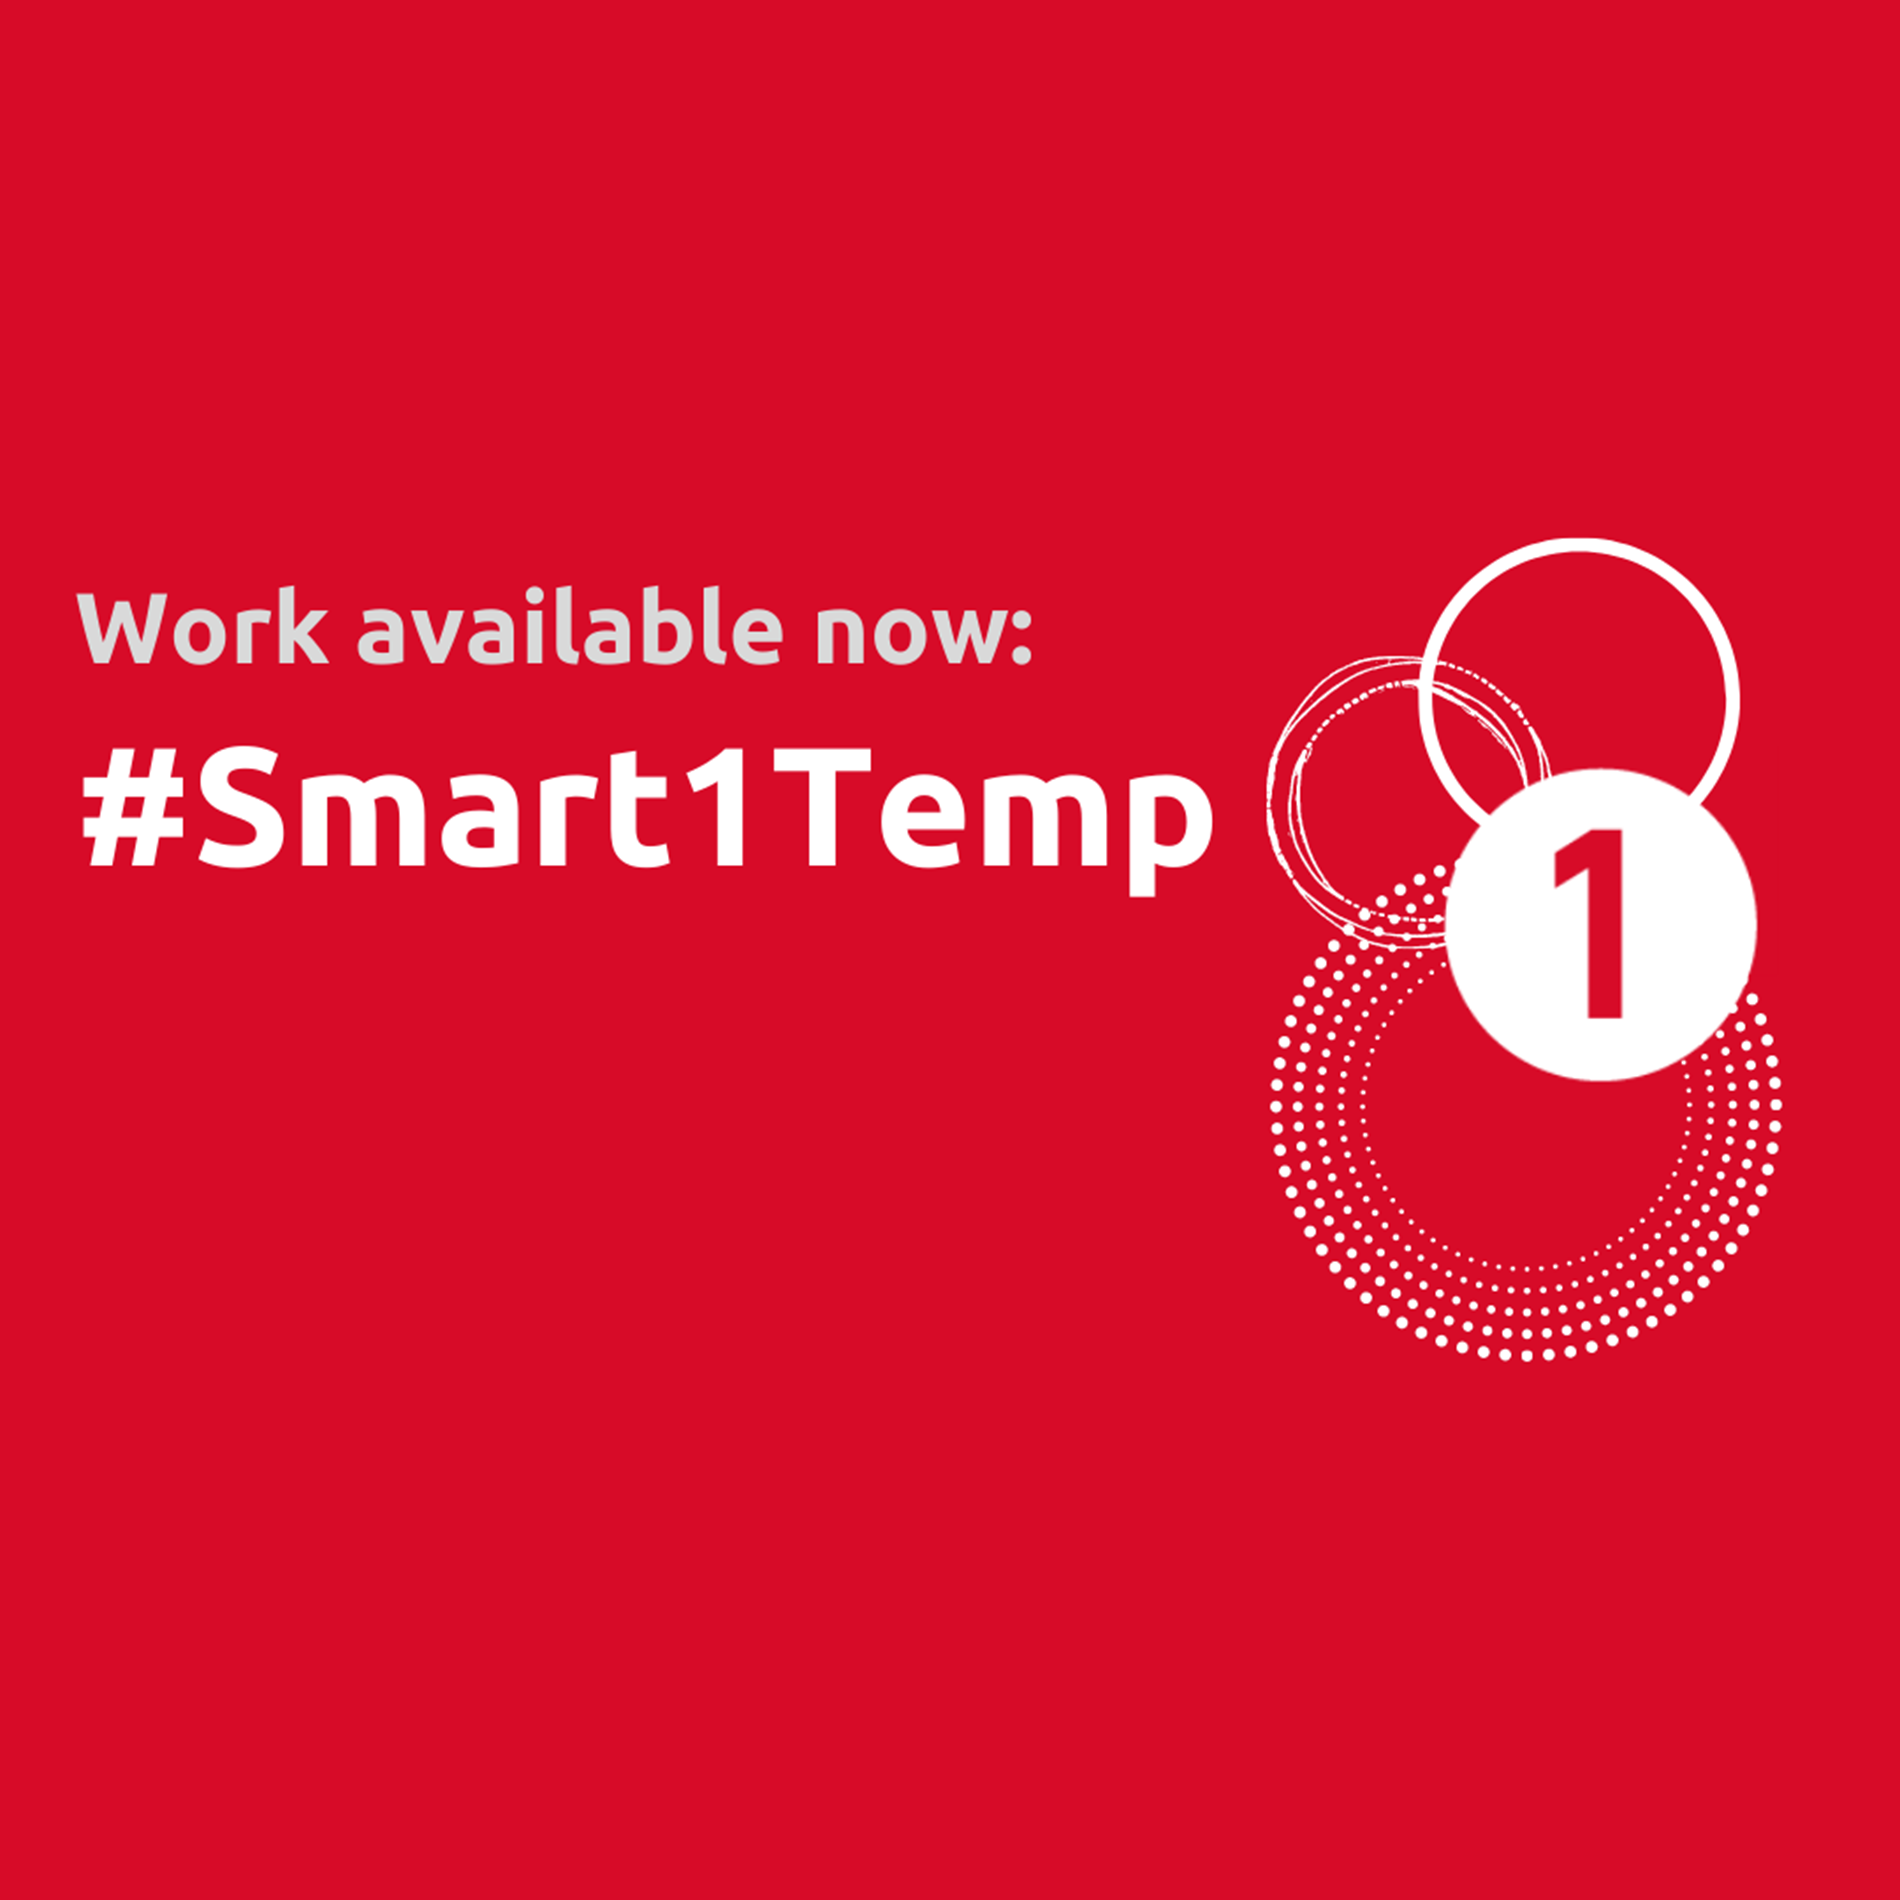 Why should you become a #Smart1Temp?